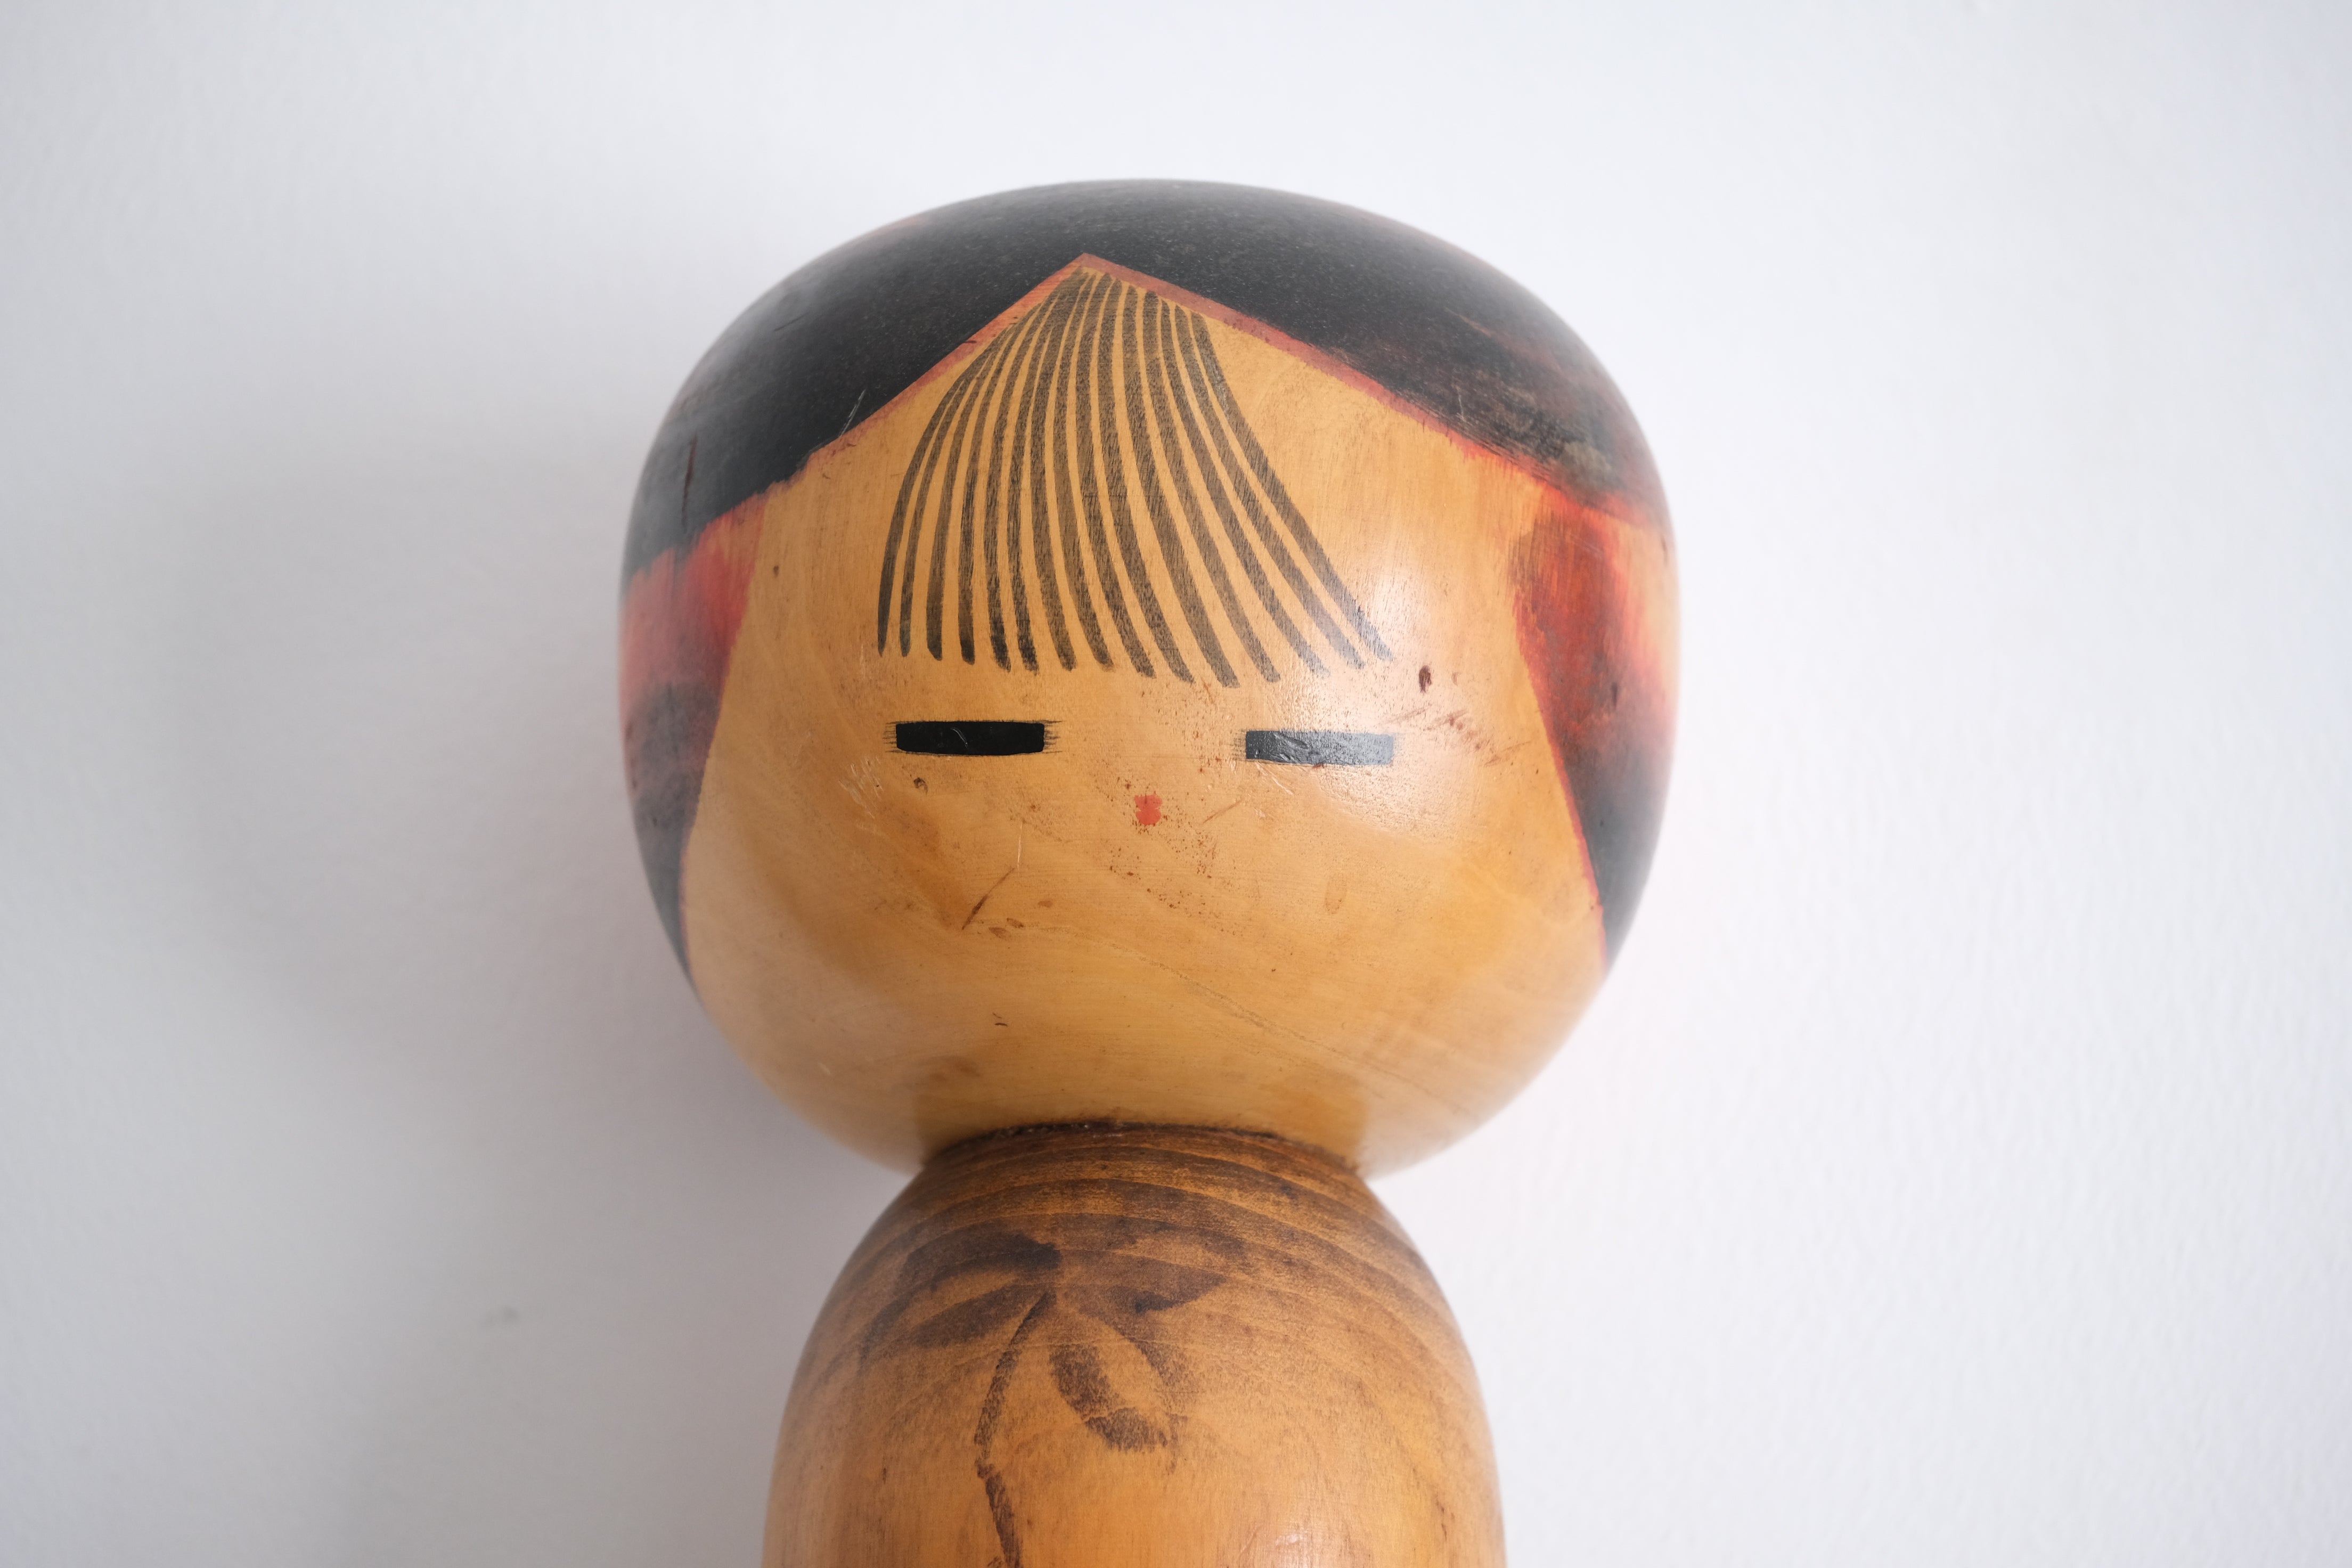 Exclusive Vintage Creative Kokeshi  By Watanabe Masao (1917-2007) | Titled: 'Winter Camellia' | 62 cm!